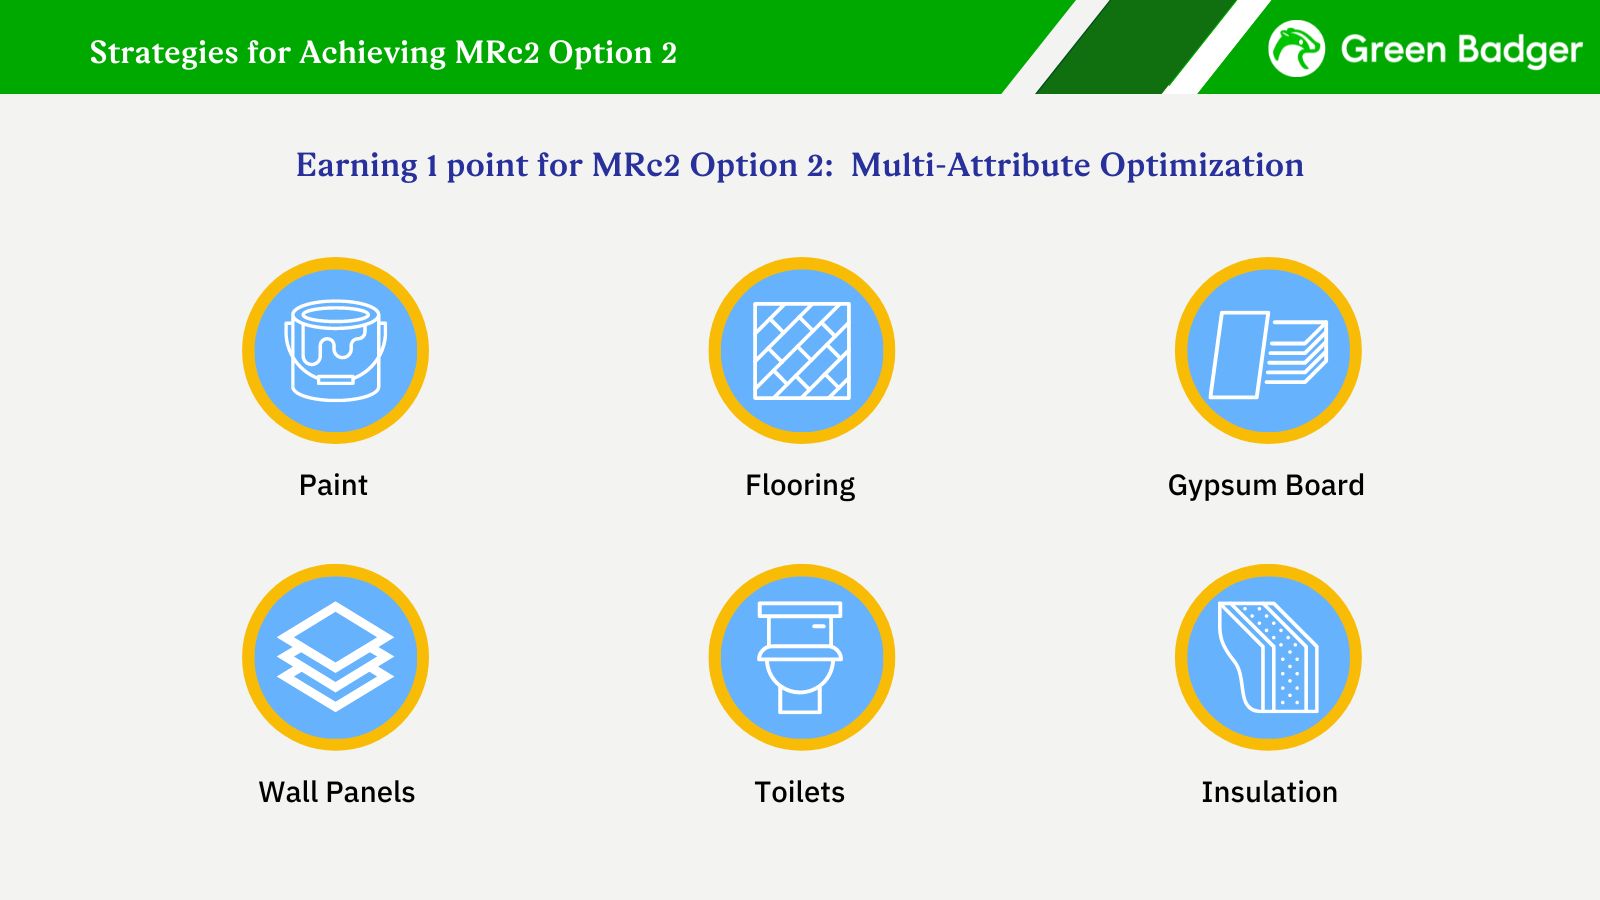 Green Badger's Ultimate Guide to LEED - MRc2 Option 2 Strategies